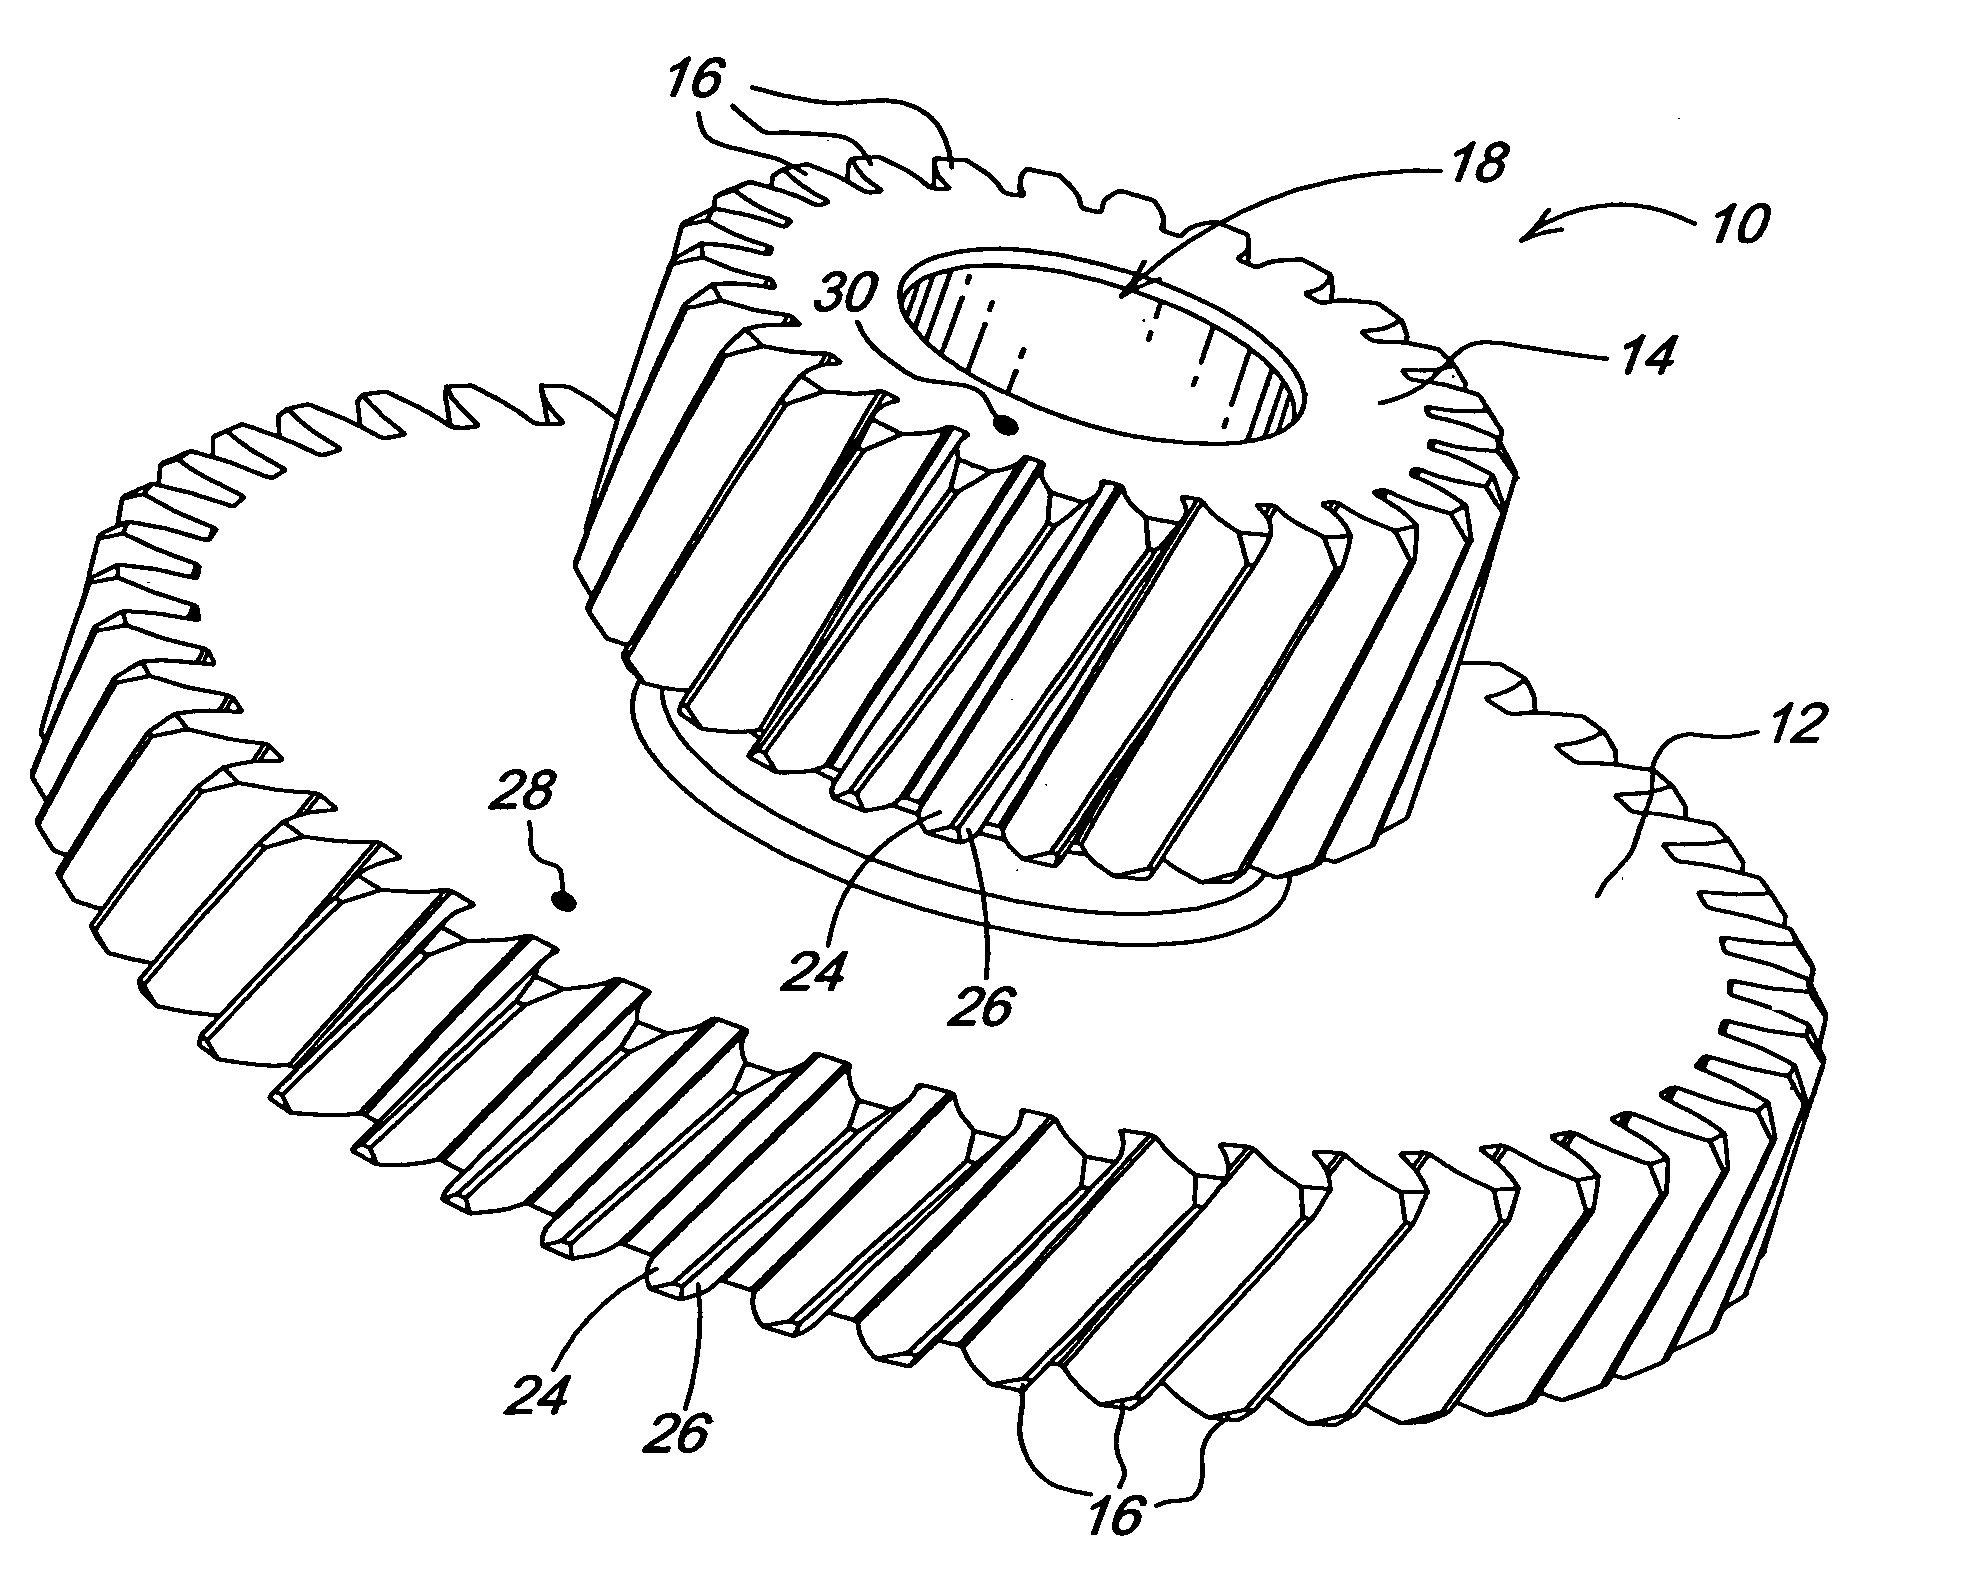 Method of manufacturing compound helical planet gears having different leads